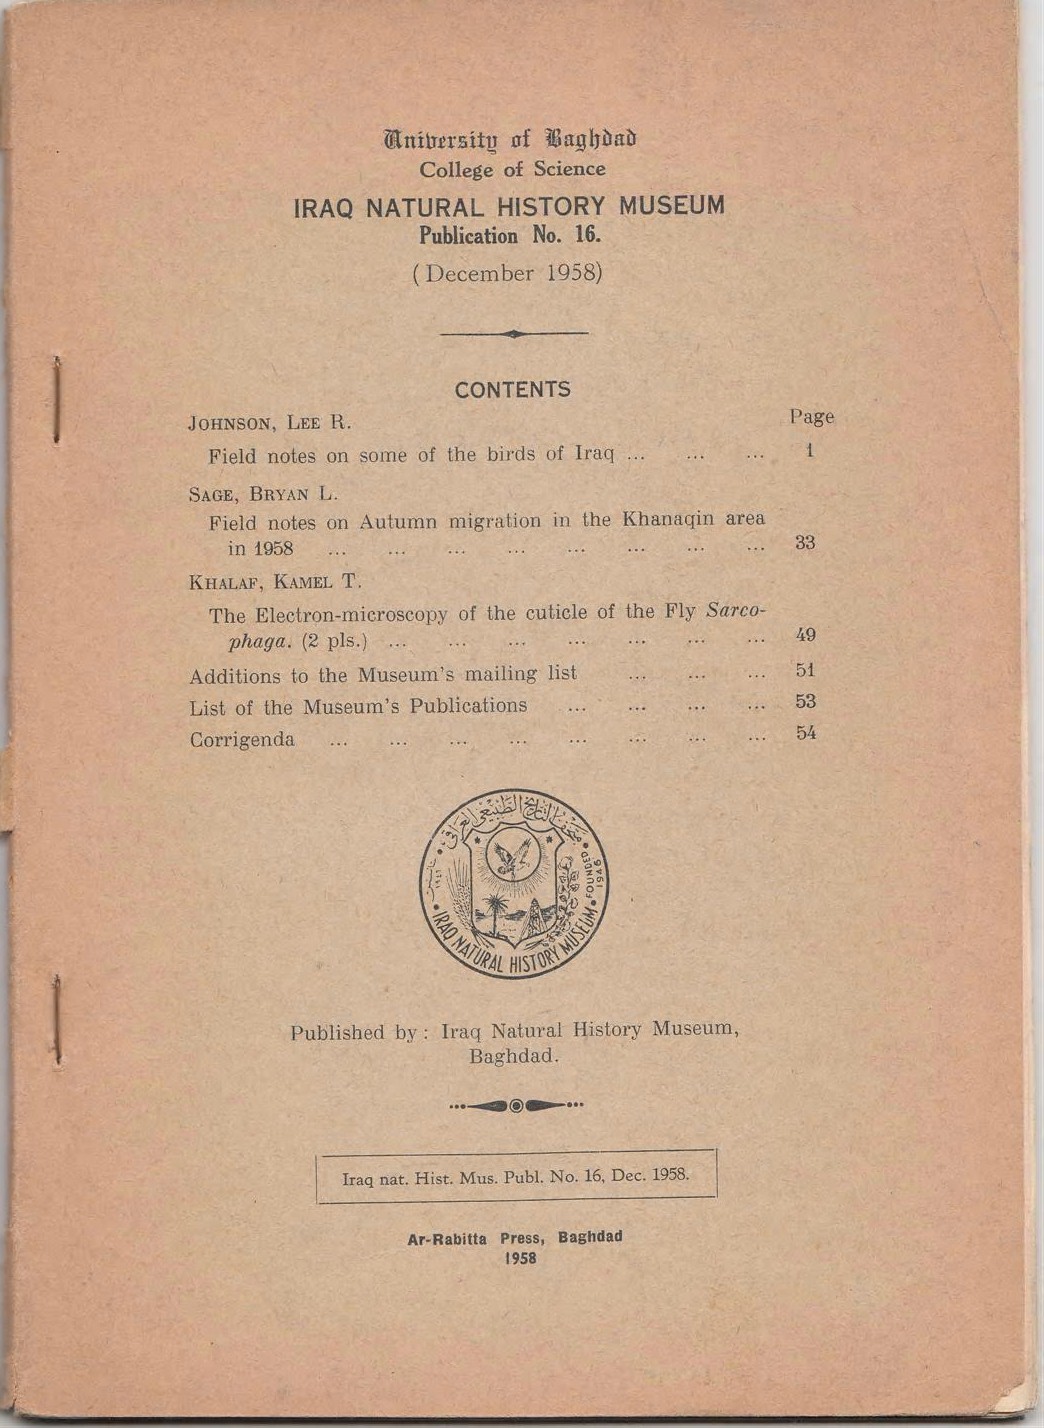 					View No. 16 (1958): Field notes on some of the birds of Iraq by JOHNSON, LEE R. p;1
				